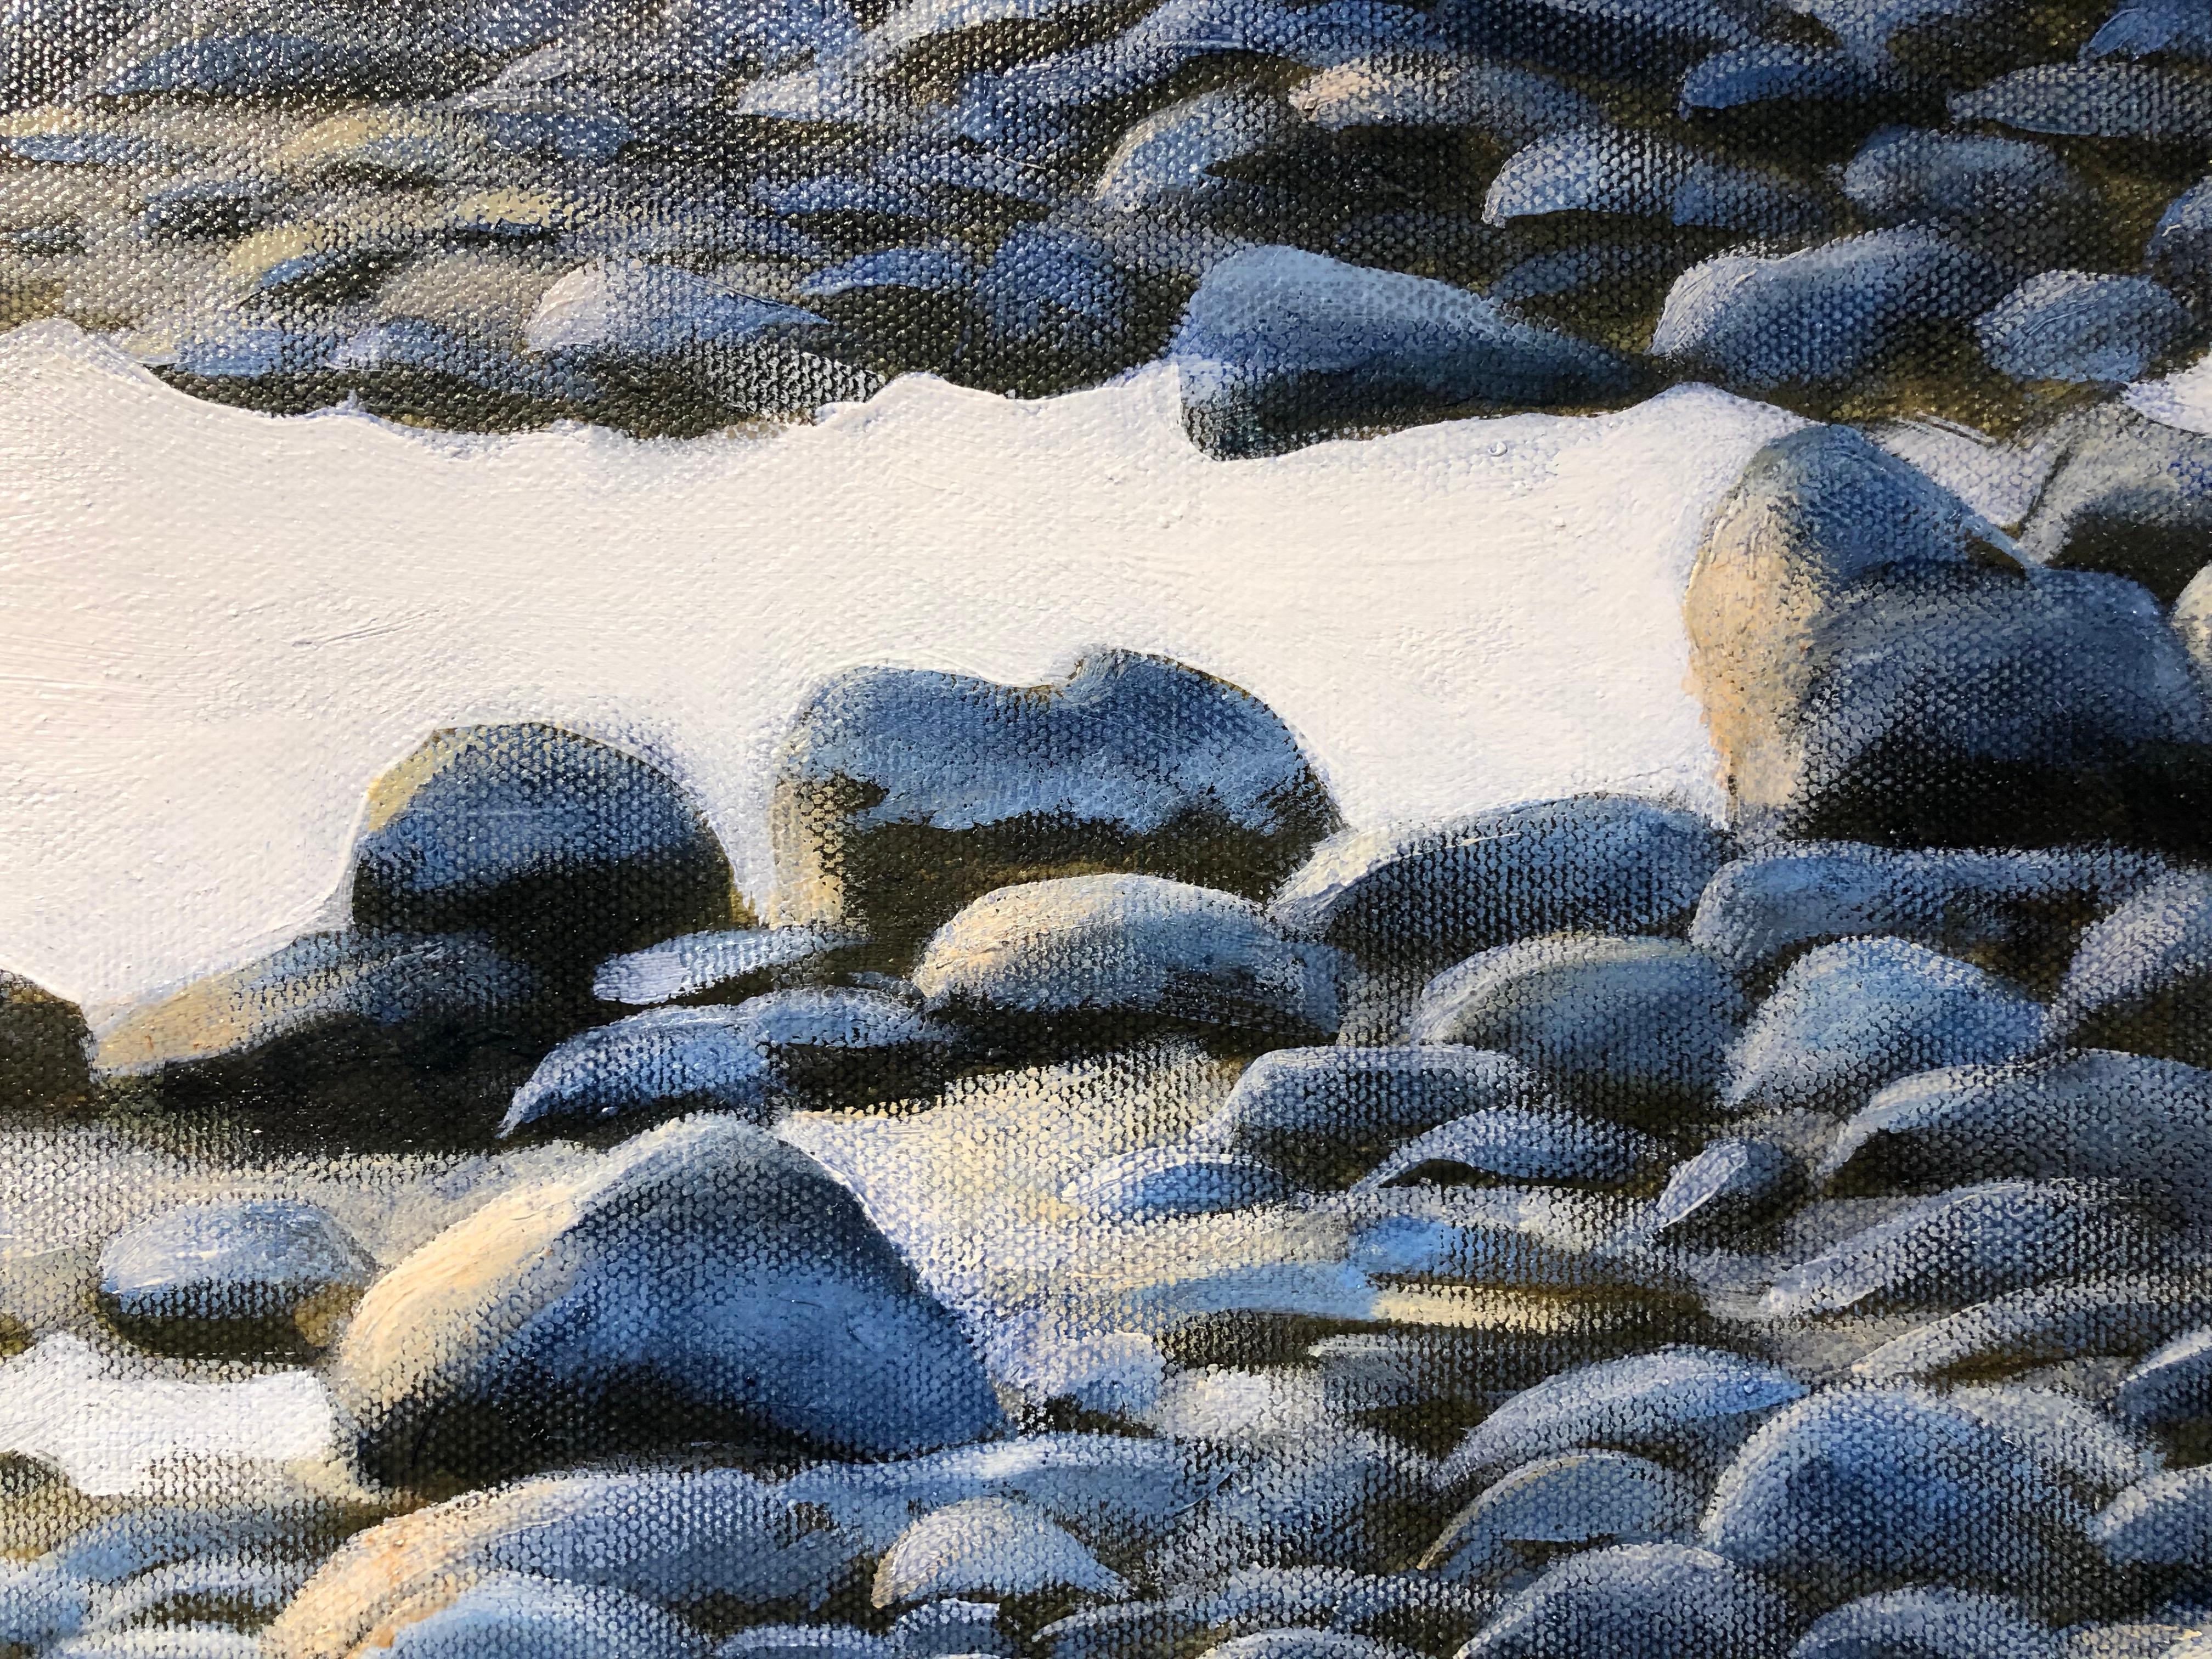 This oil on canvas painting of blue gray rocks and water lapping at the shore is beautifully painted in a representational style.  Upon close examination the brush strokes show an influence of impressionism.  The scene is saturated with bright